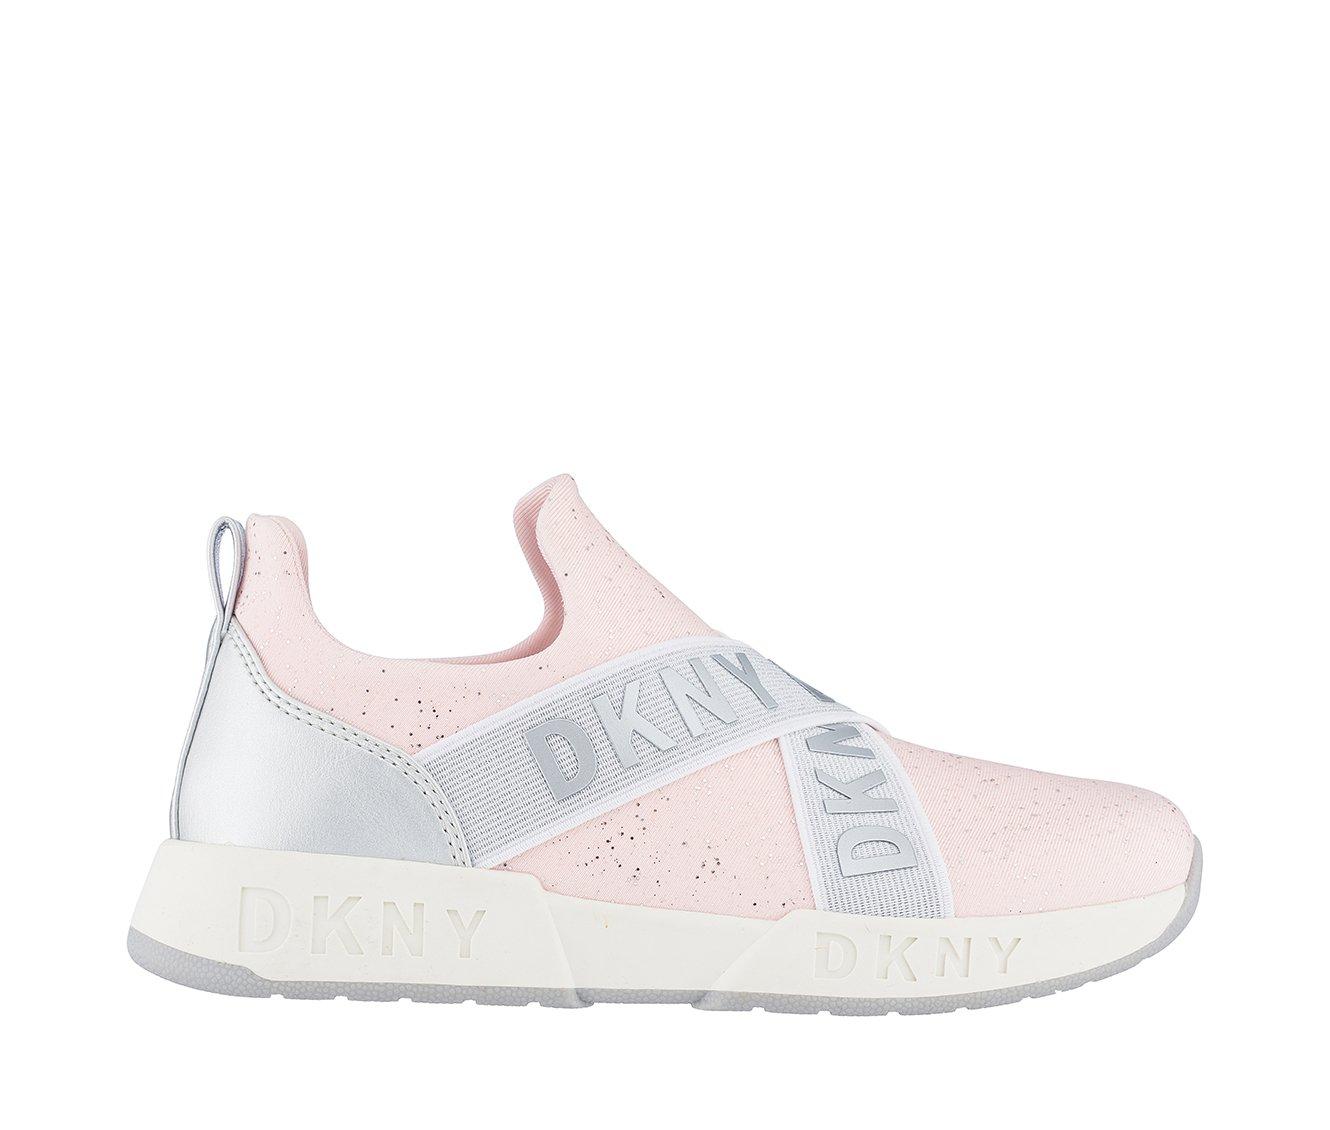 Girls' DKNY Toddler Maddie Criss Cross Sneakers